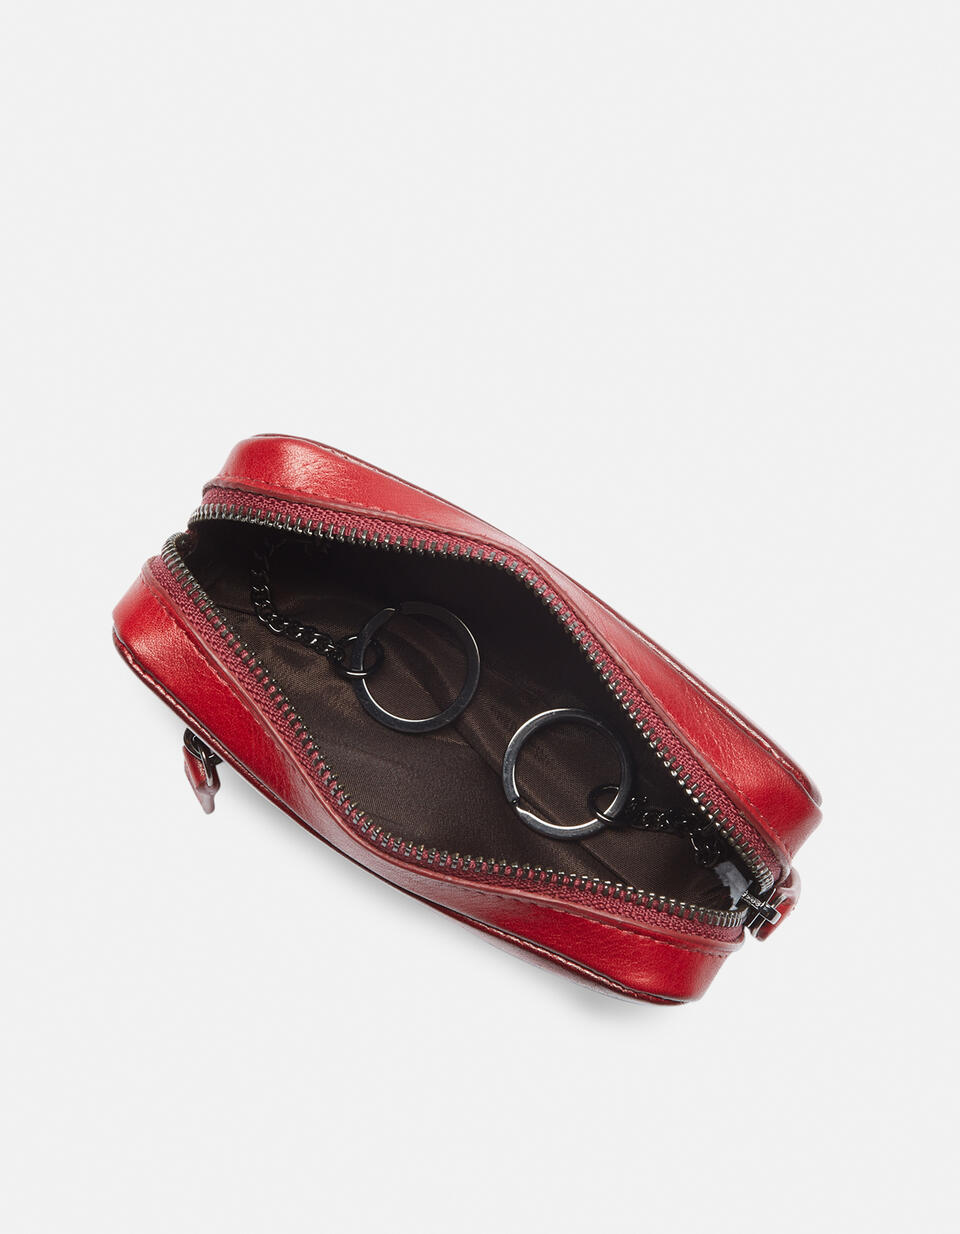 Anti-Rfid Warm and Color leather keychain bag - Women's Wallets - Men's Wallets | Wallets ROSSO - Women's Wallets - Men's Wallets | WalletsCuoieria Fiorentina